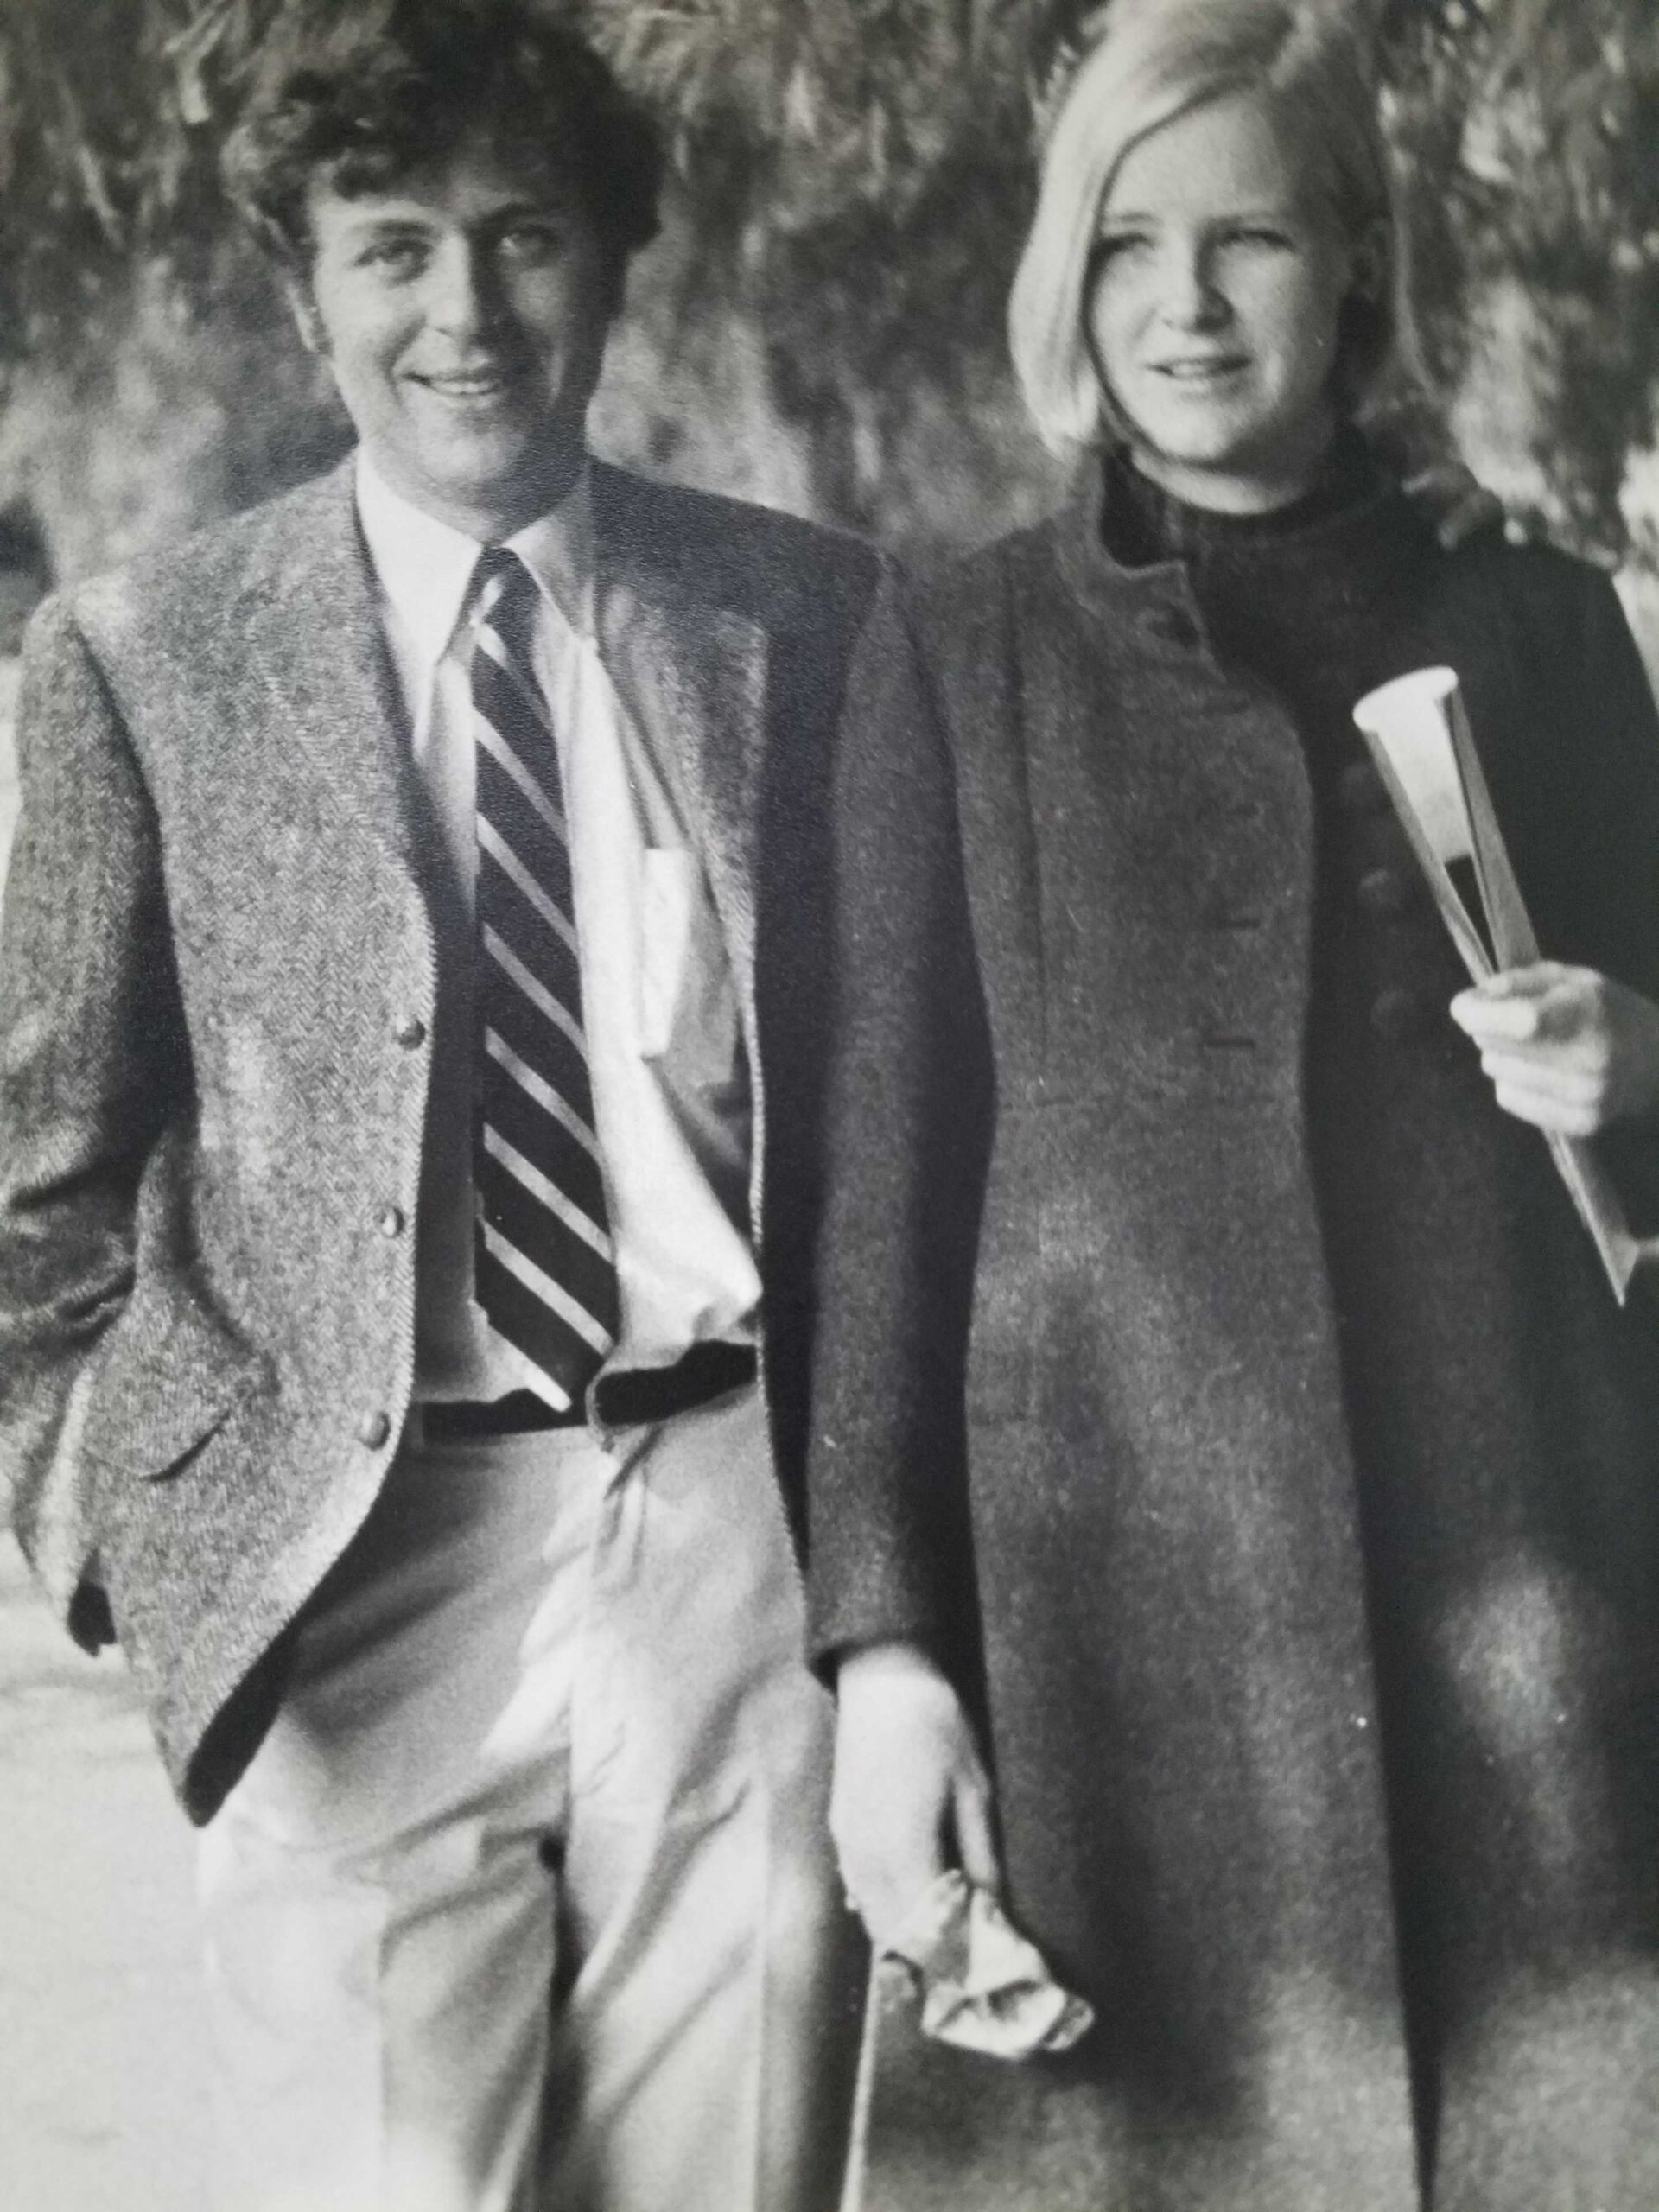 Gene Stelzig in 1968 in England with his wife-to-be.